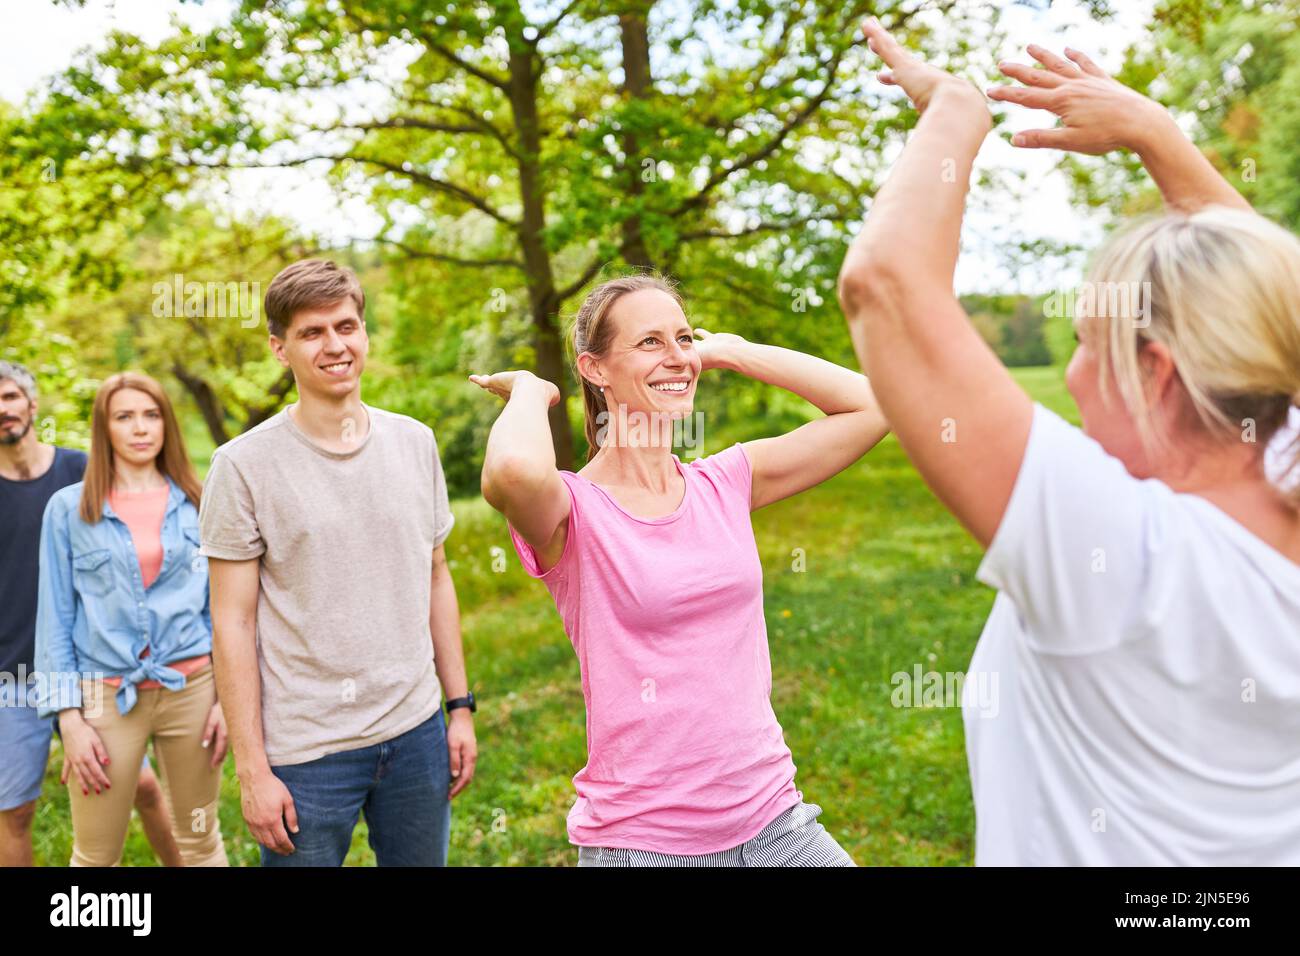 Young people giving high fives after winning a competition or for motivation Stock Photo